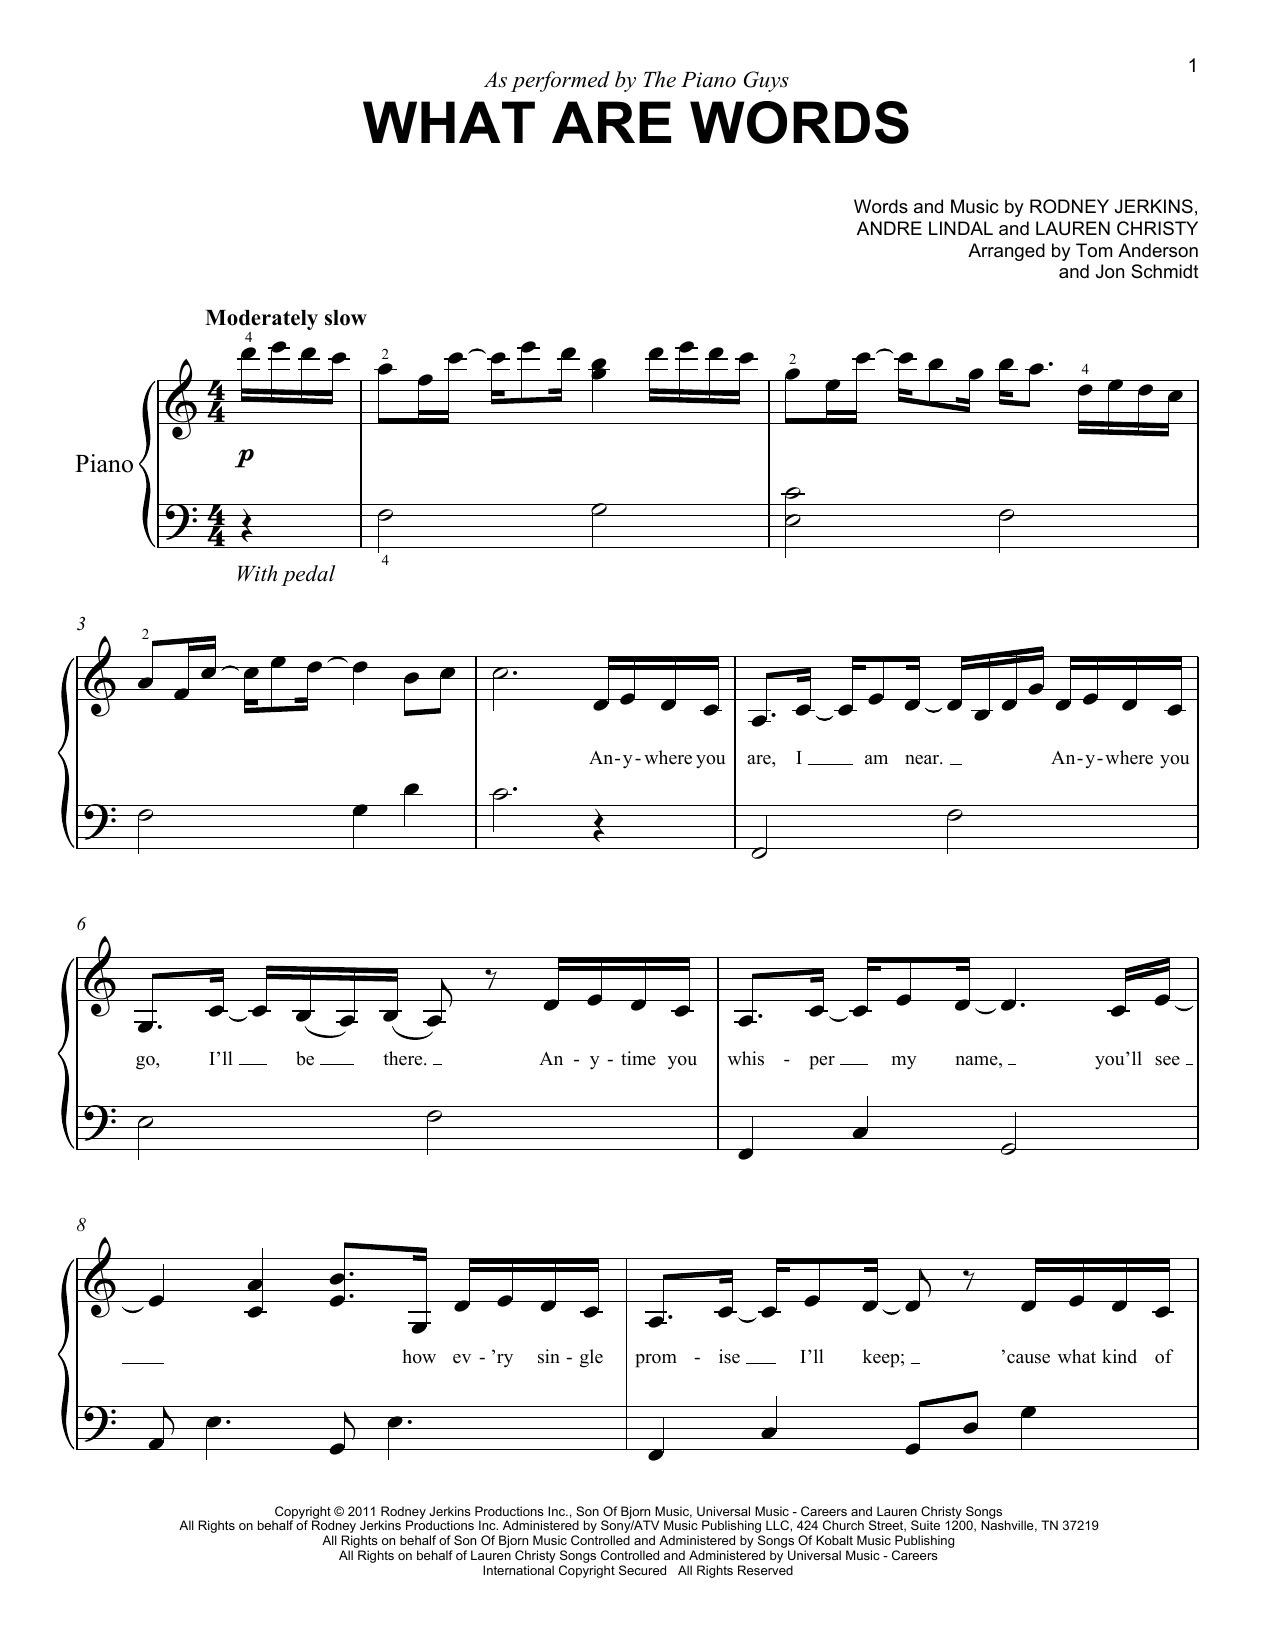 Download The Piano Guys What Are Words Sheet Music